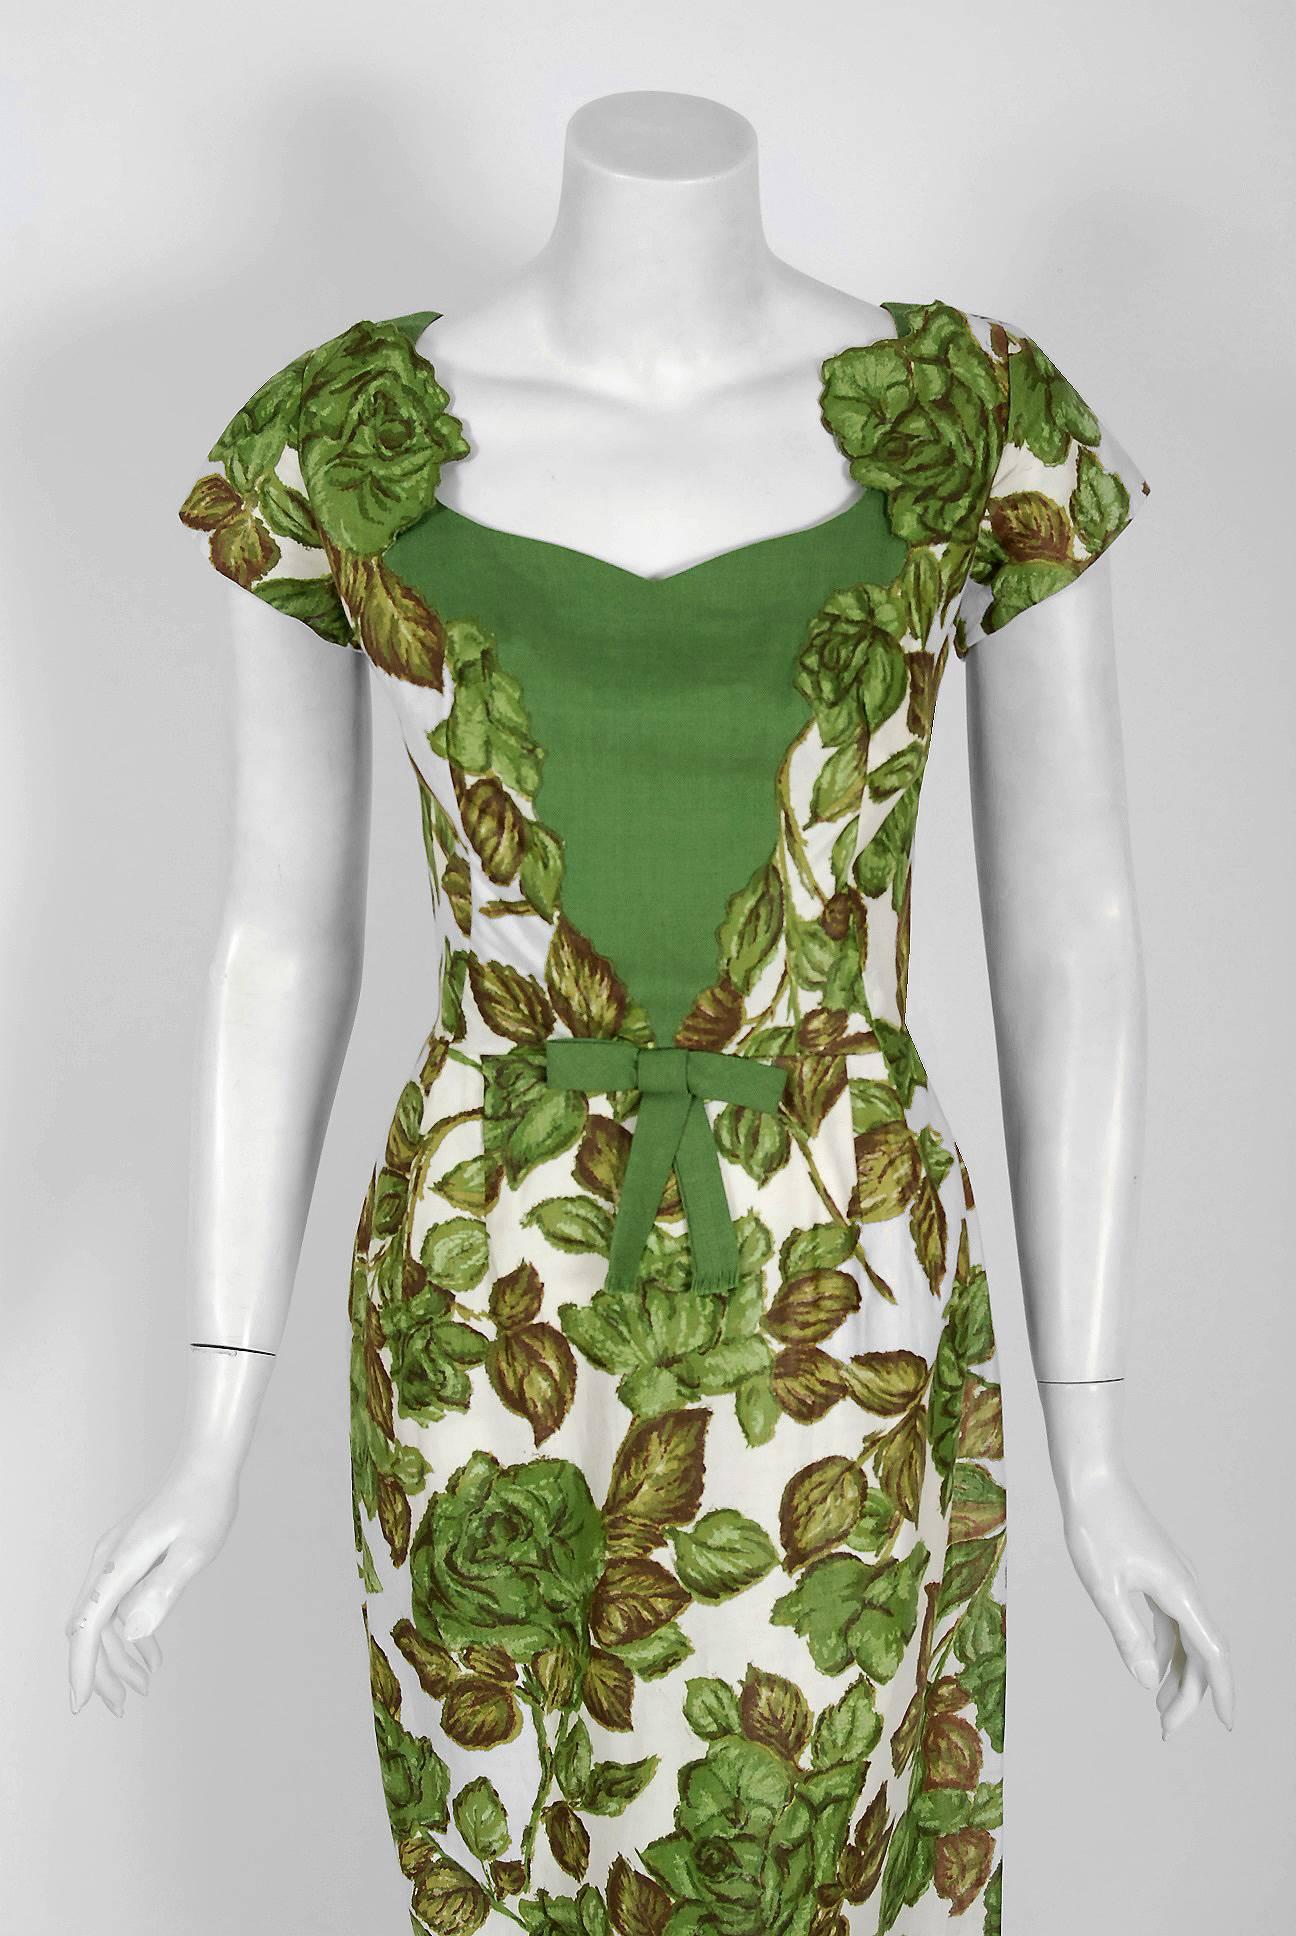 Stunning 1950's Jeanette Alexander designer bombshell wiggle sundress from the Old Hollywood era of glamour! The green linen bodice has an alluring sweetheart plunge cap-sleeve that falls into a hourglass nipped-waist bow. The rose floral applique